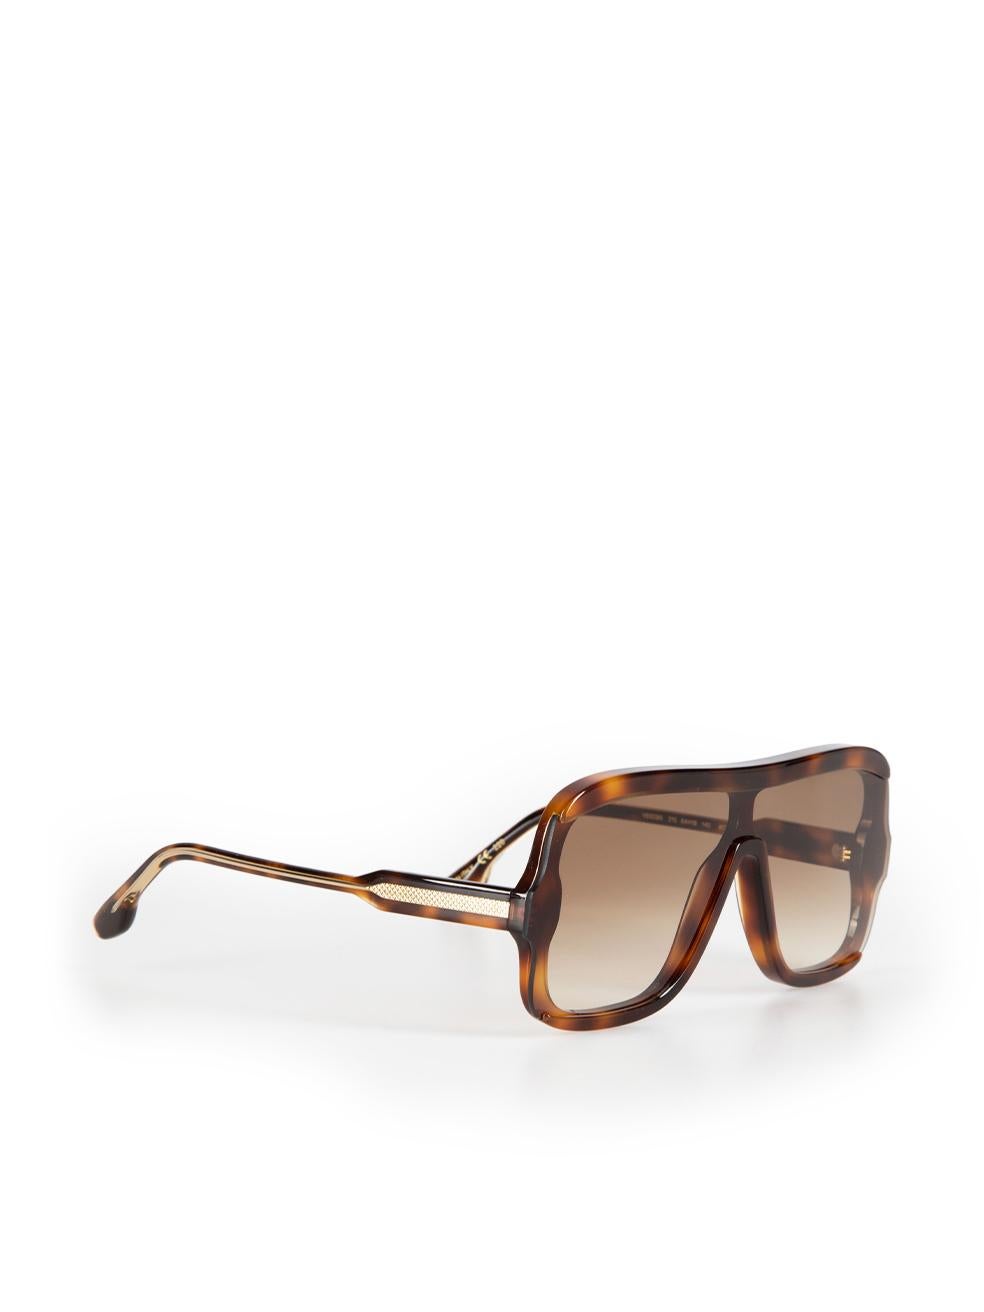 Victoria Beckham Brown Tortoiseshell Shield Sunglasses In New Condition For Sale In London, GB